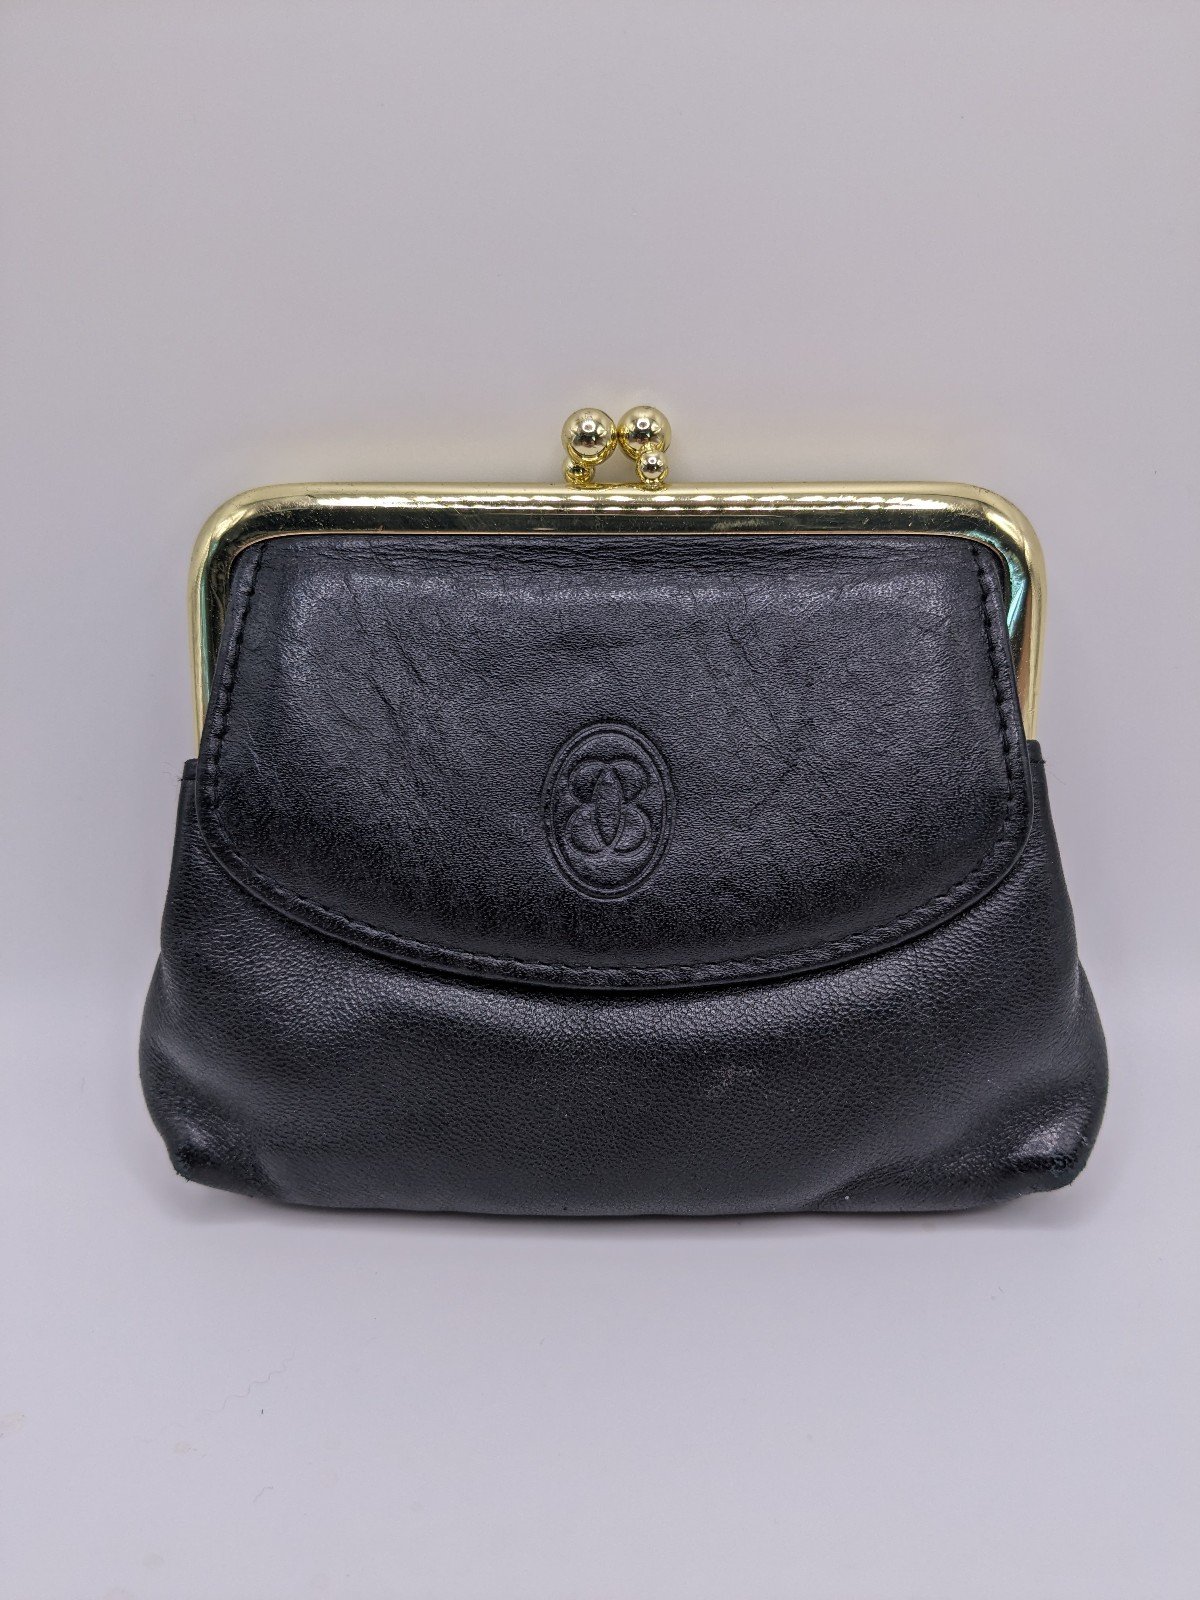 Buxton Leather Coin Purse Black With gold clasp, Front Pocket Snap EcPsjmtV8